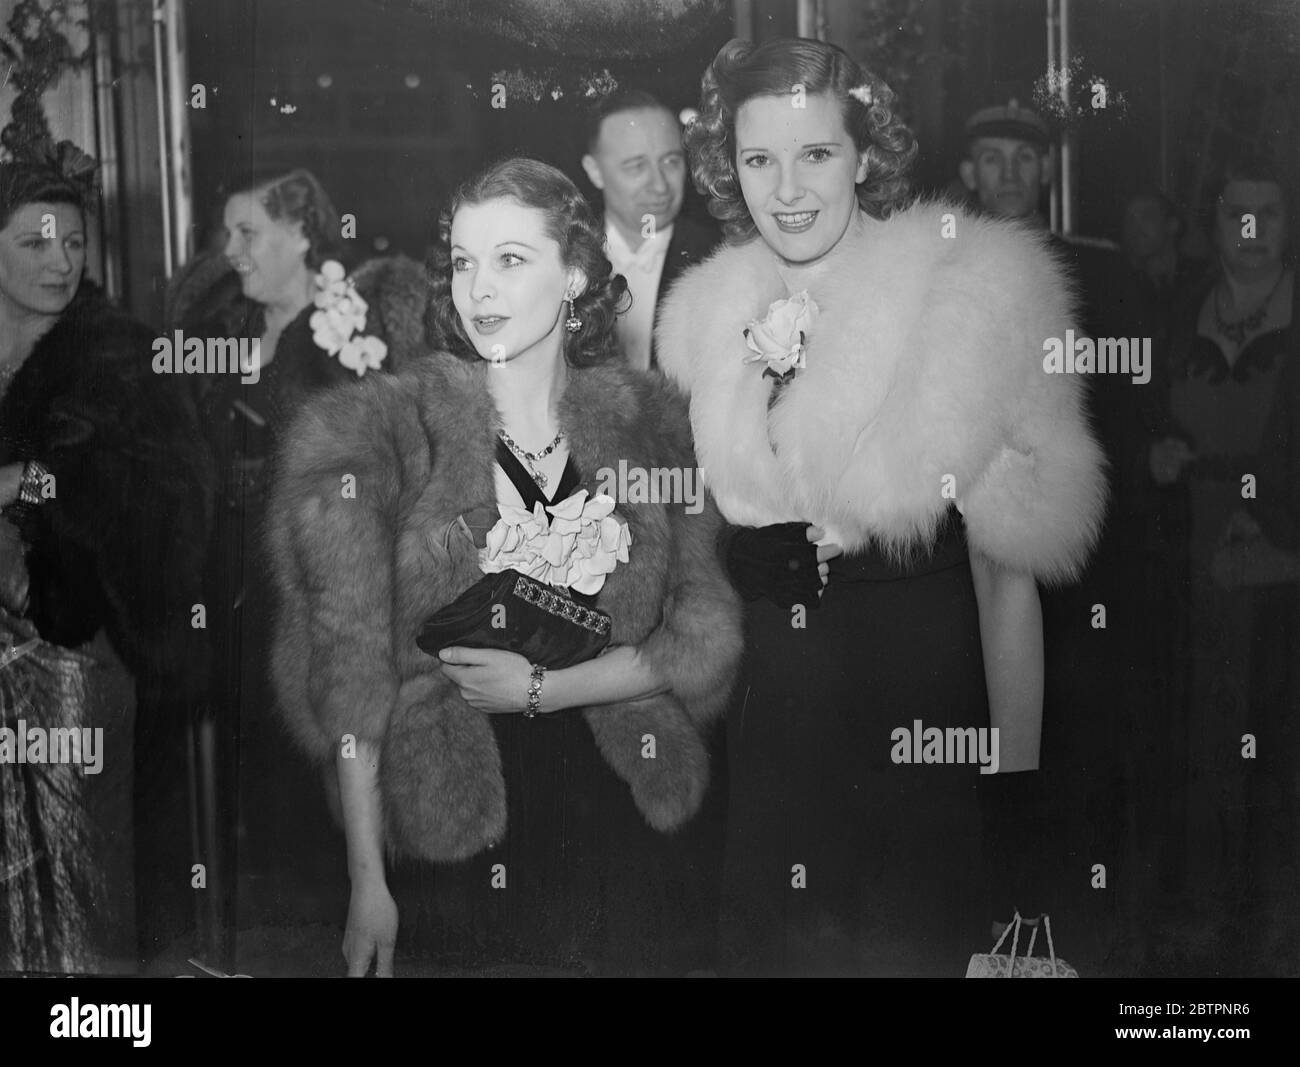 Actresses at Laughton's film premiere. Charles Laughton's new film 'Vessel of Wrath', was given its premiere at the Regal, Marble Arch. Photo shows, the actresses Leonora Corbett (right) and Vivienne Leigh at the premiere. 24 February 1938 Stock Photo